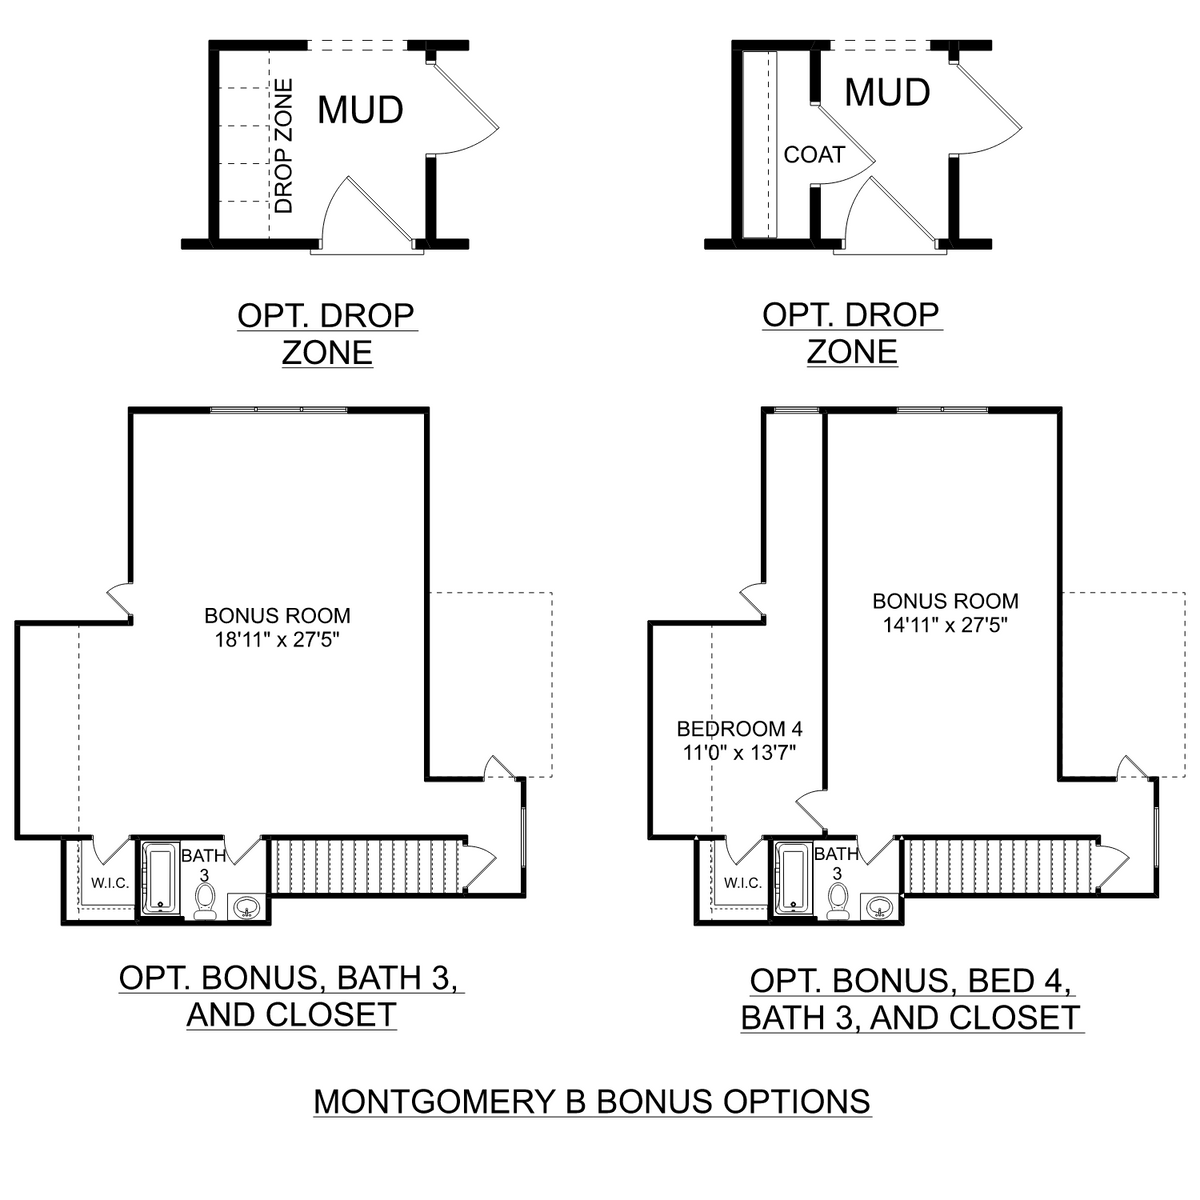 3 - The Montgomery B With Bonus floor plan layout for 111 Nellies Way in Davidson Homes' Pikes Ridge community.